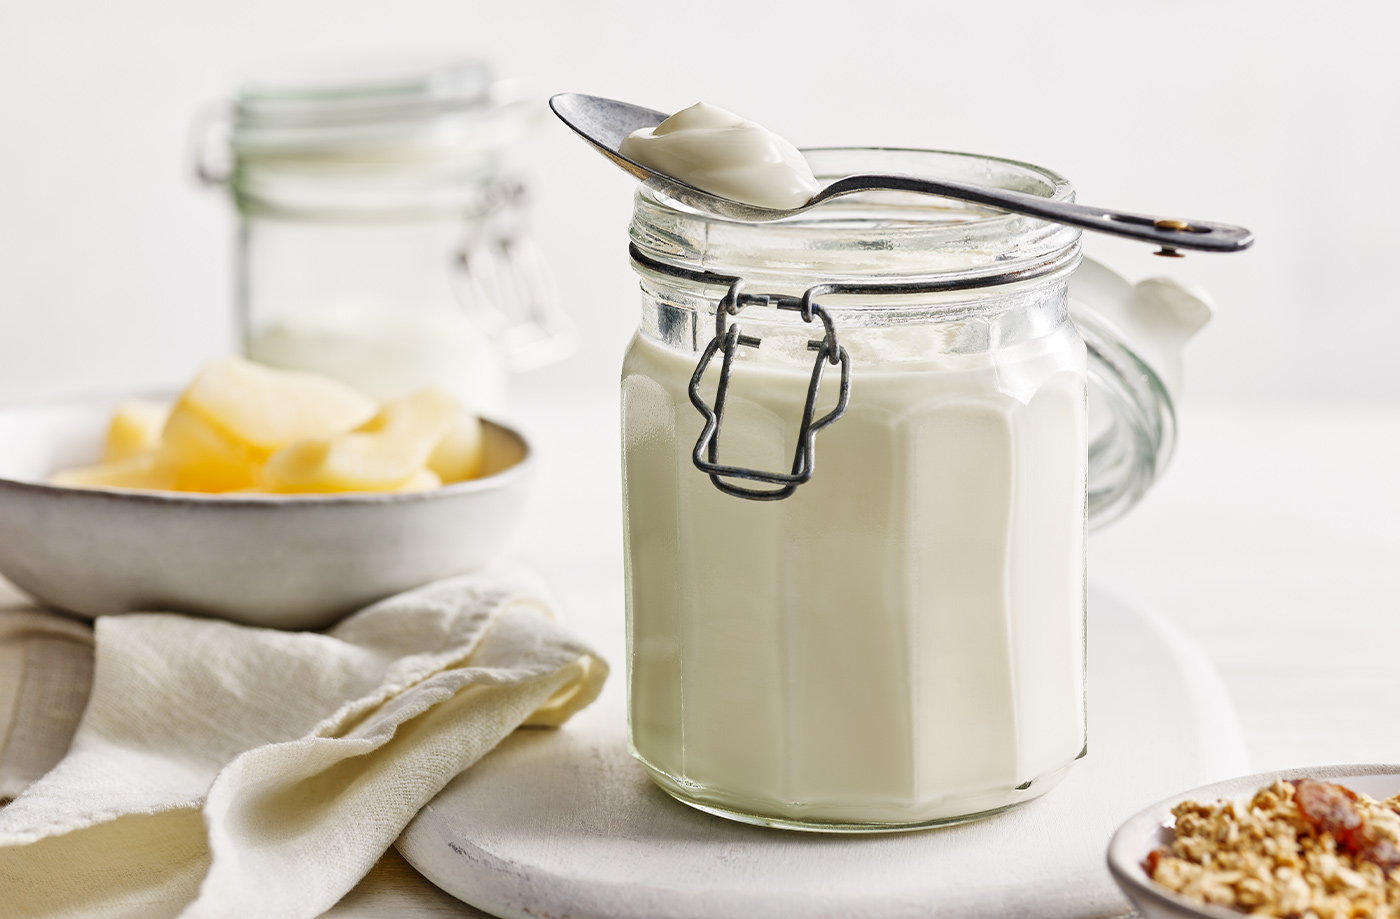 https://recipes.net/wp-content/uploads/2023/09/how-to-make-yogurt-a-step-by-step-guide-1695111309.jpg